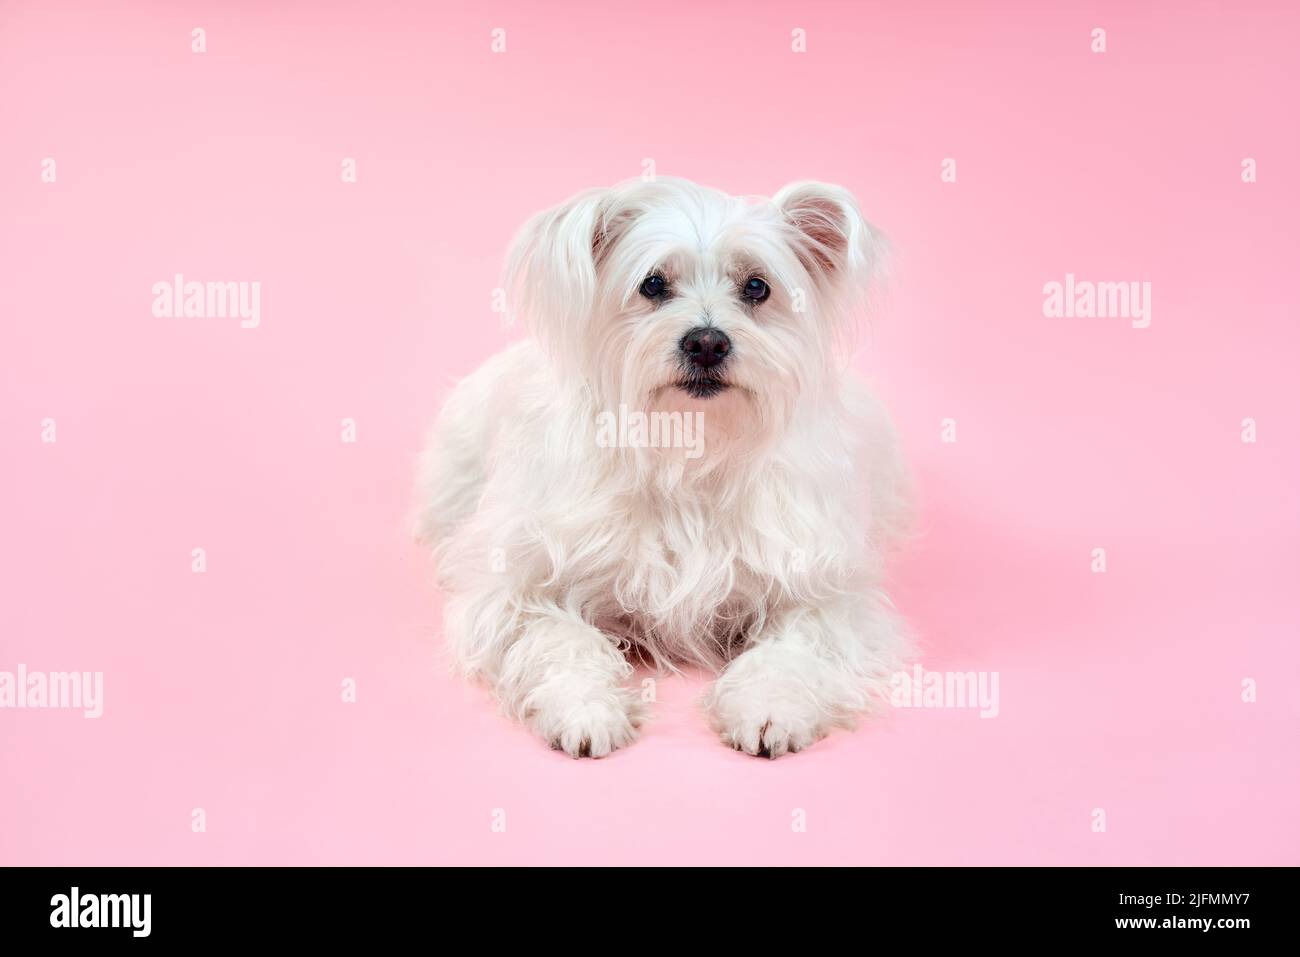 Portrait of adorable white fluffy dog posing on studio isolated on pink background Stock Photo